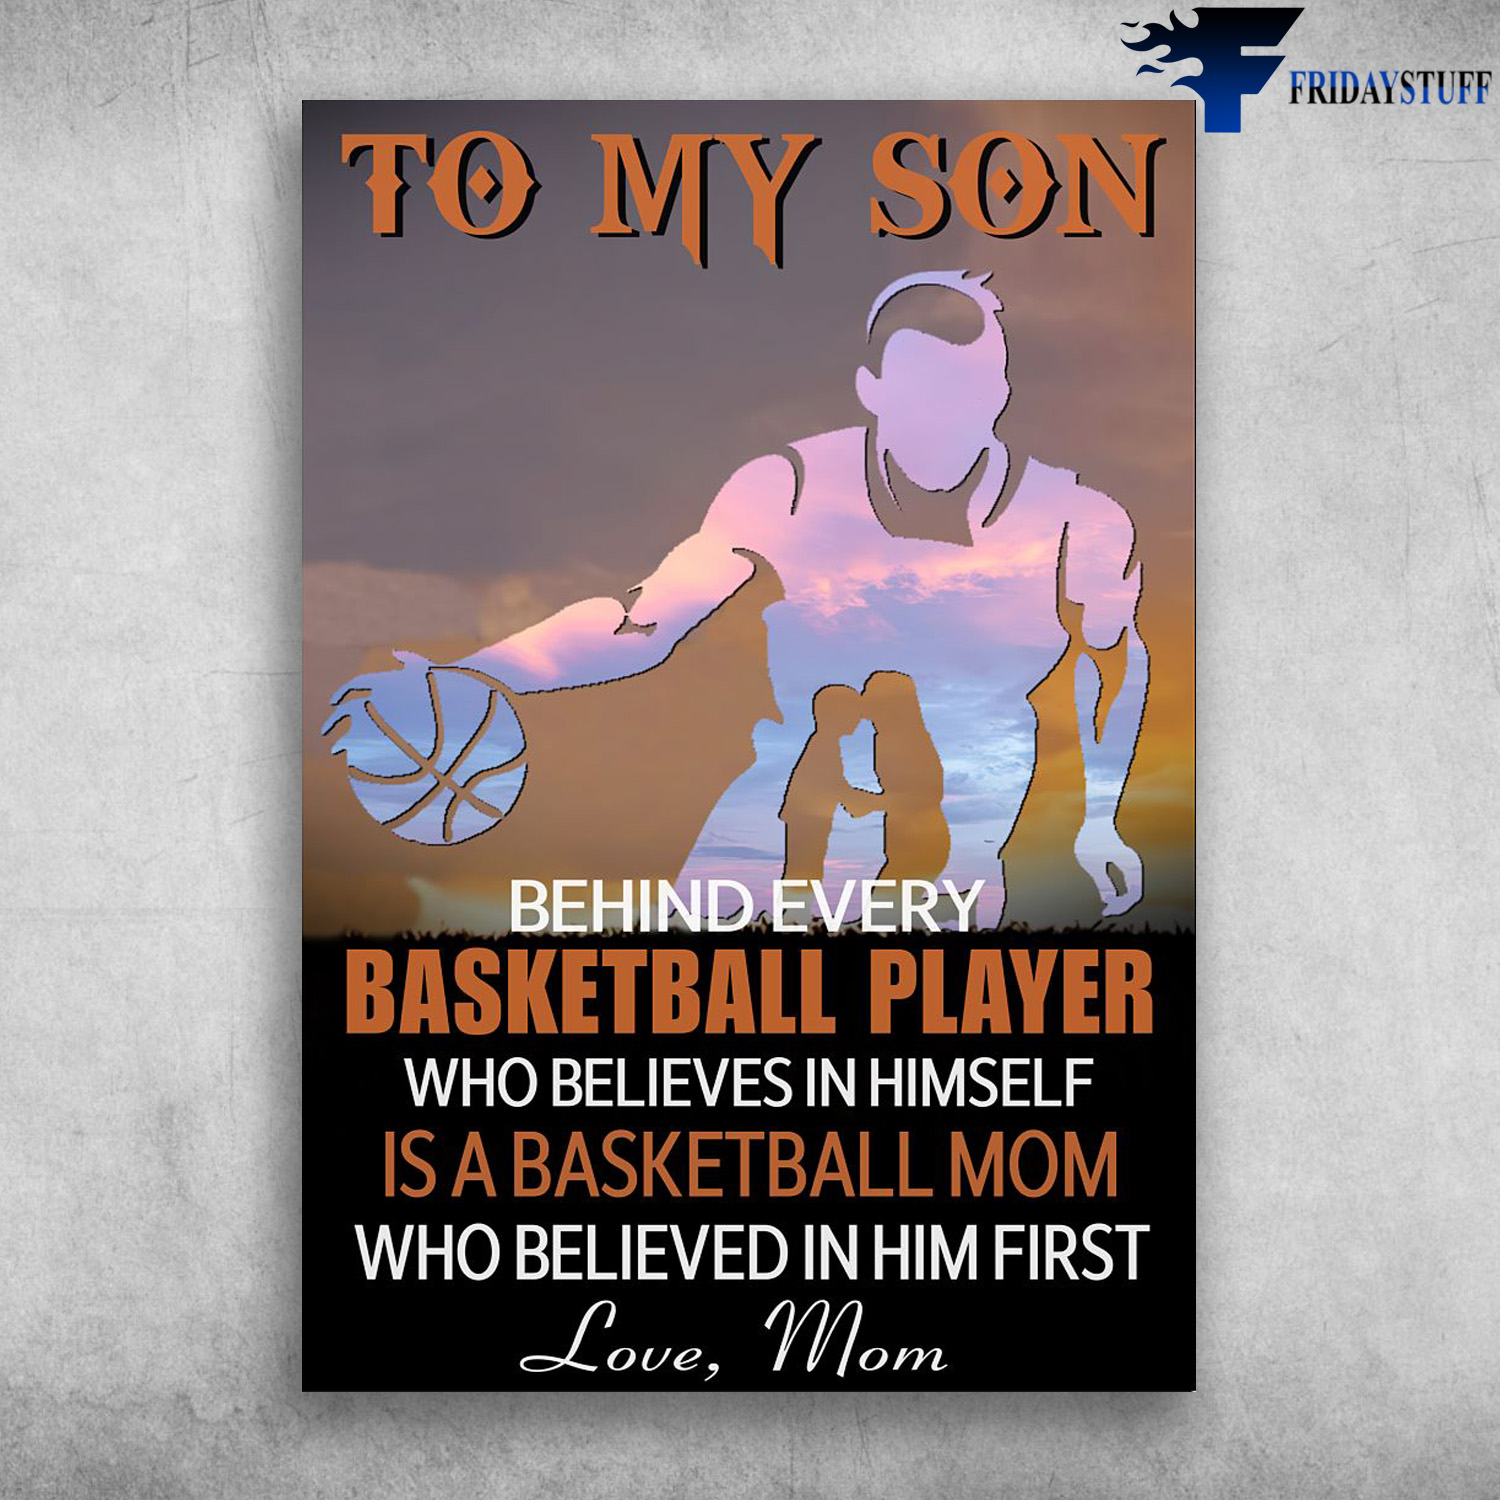 Mom And Son, Hockey Player - To My Son, Behind Every Basketball Player, Who Believes In Himself, Is A Basketball Mom, Who Believed In Him First, Love Mom